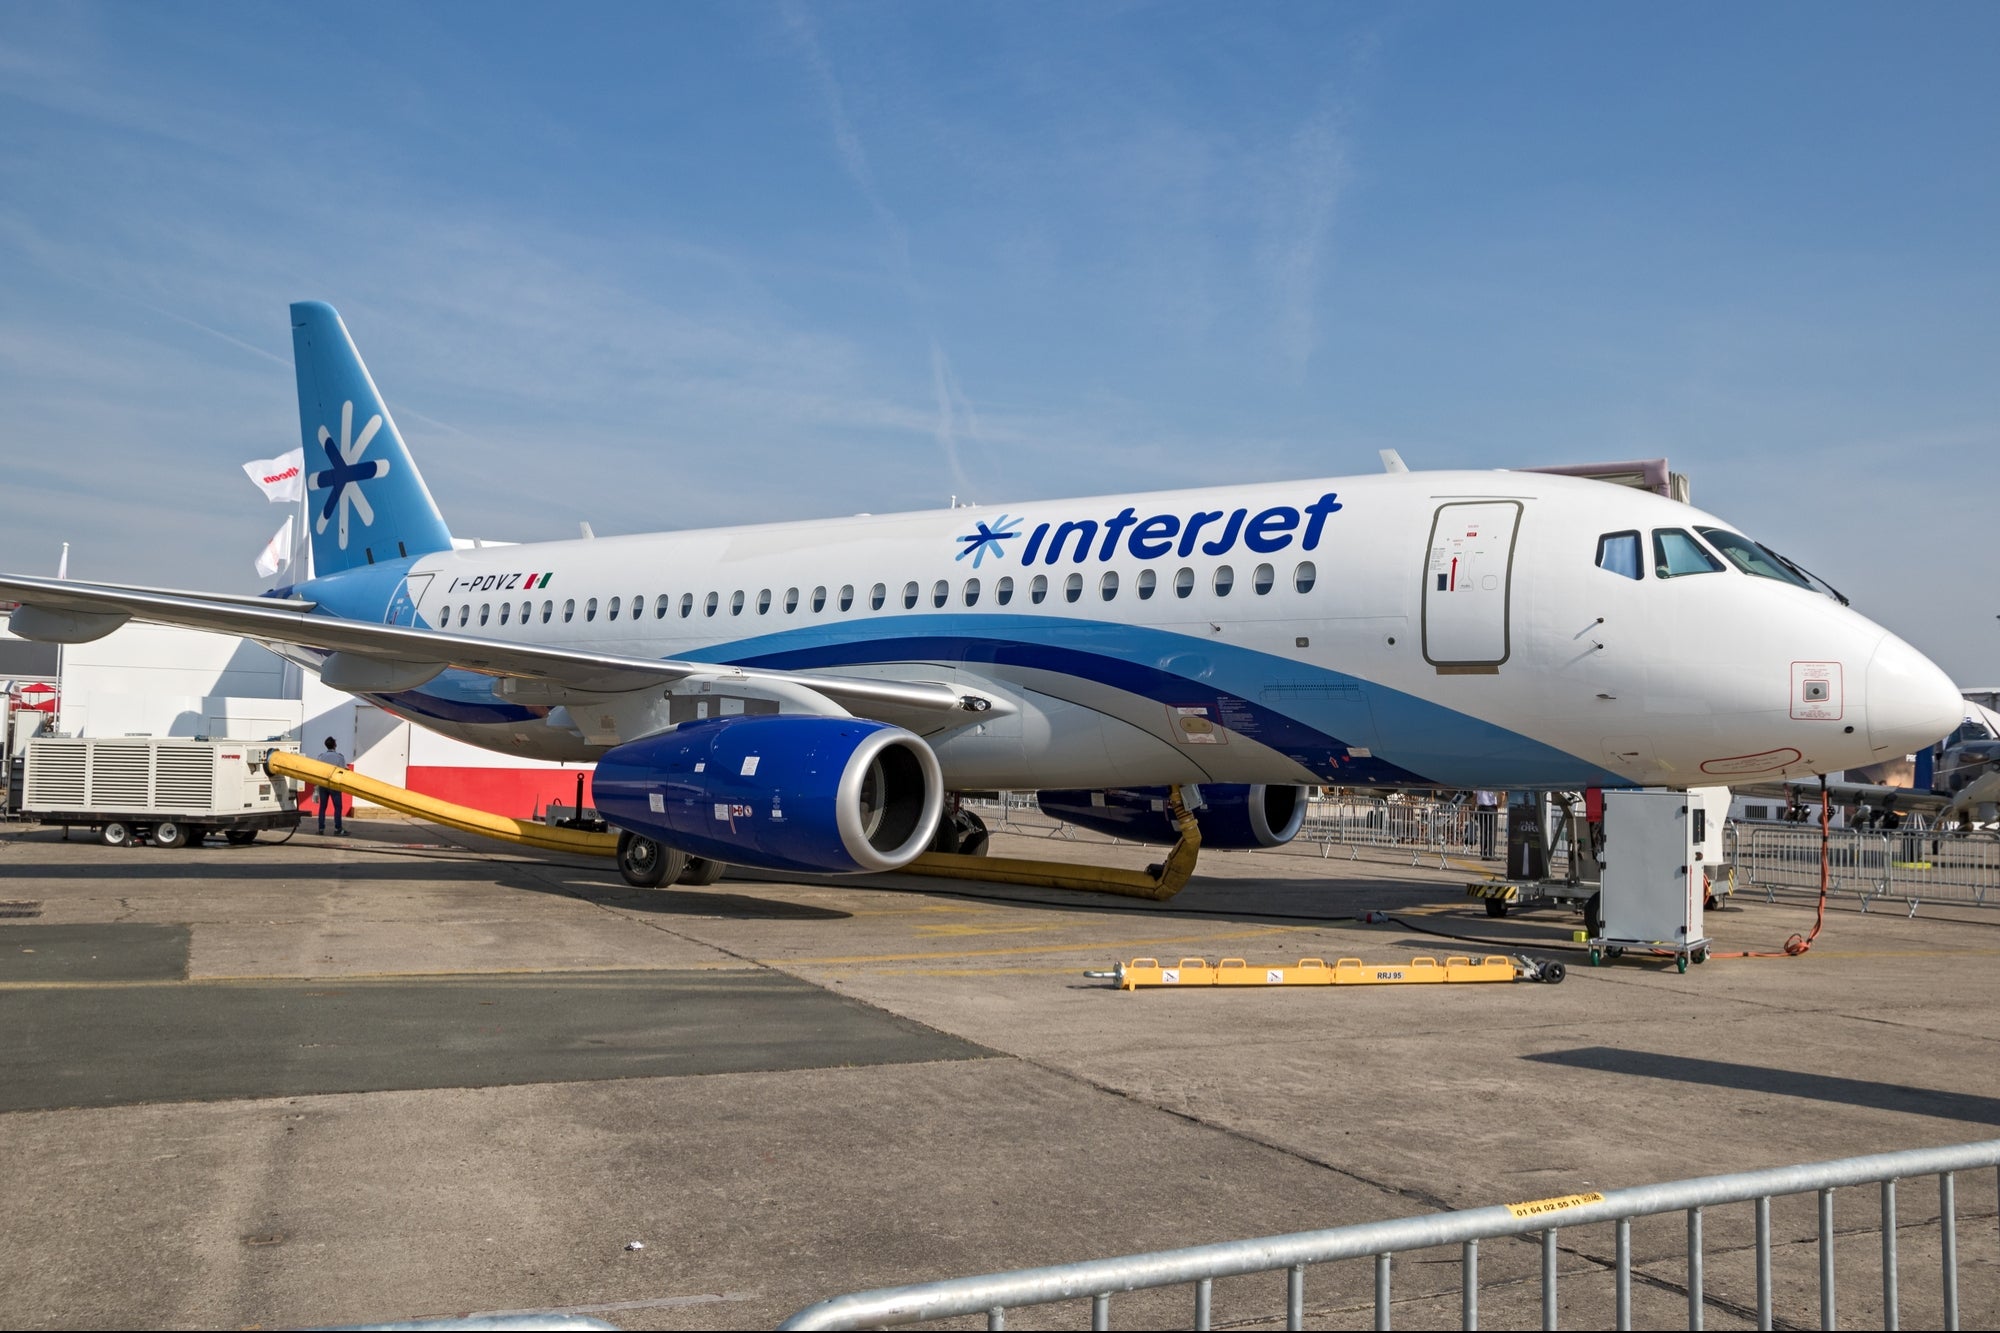 Since April, Interjet Has Run Out of Credit to Buy Jet Fuel